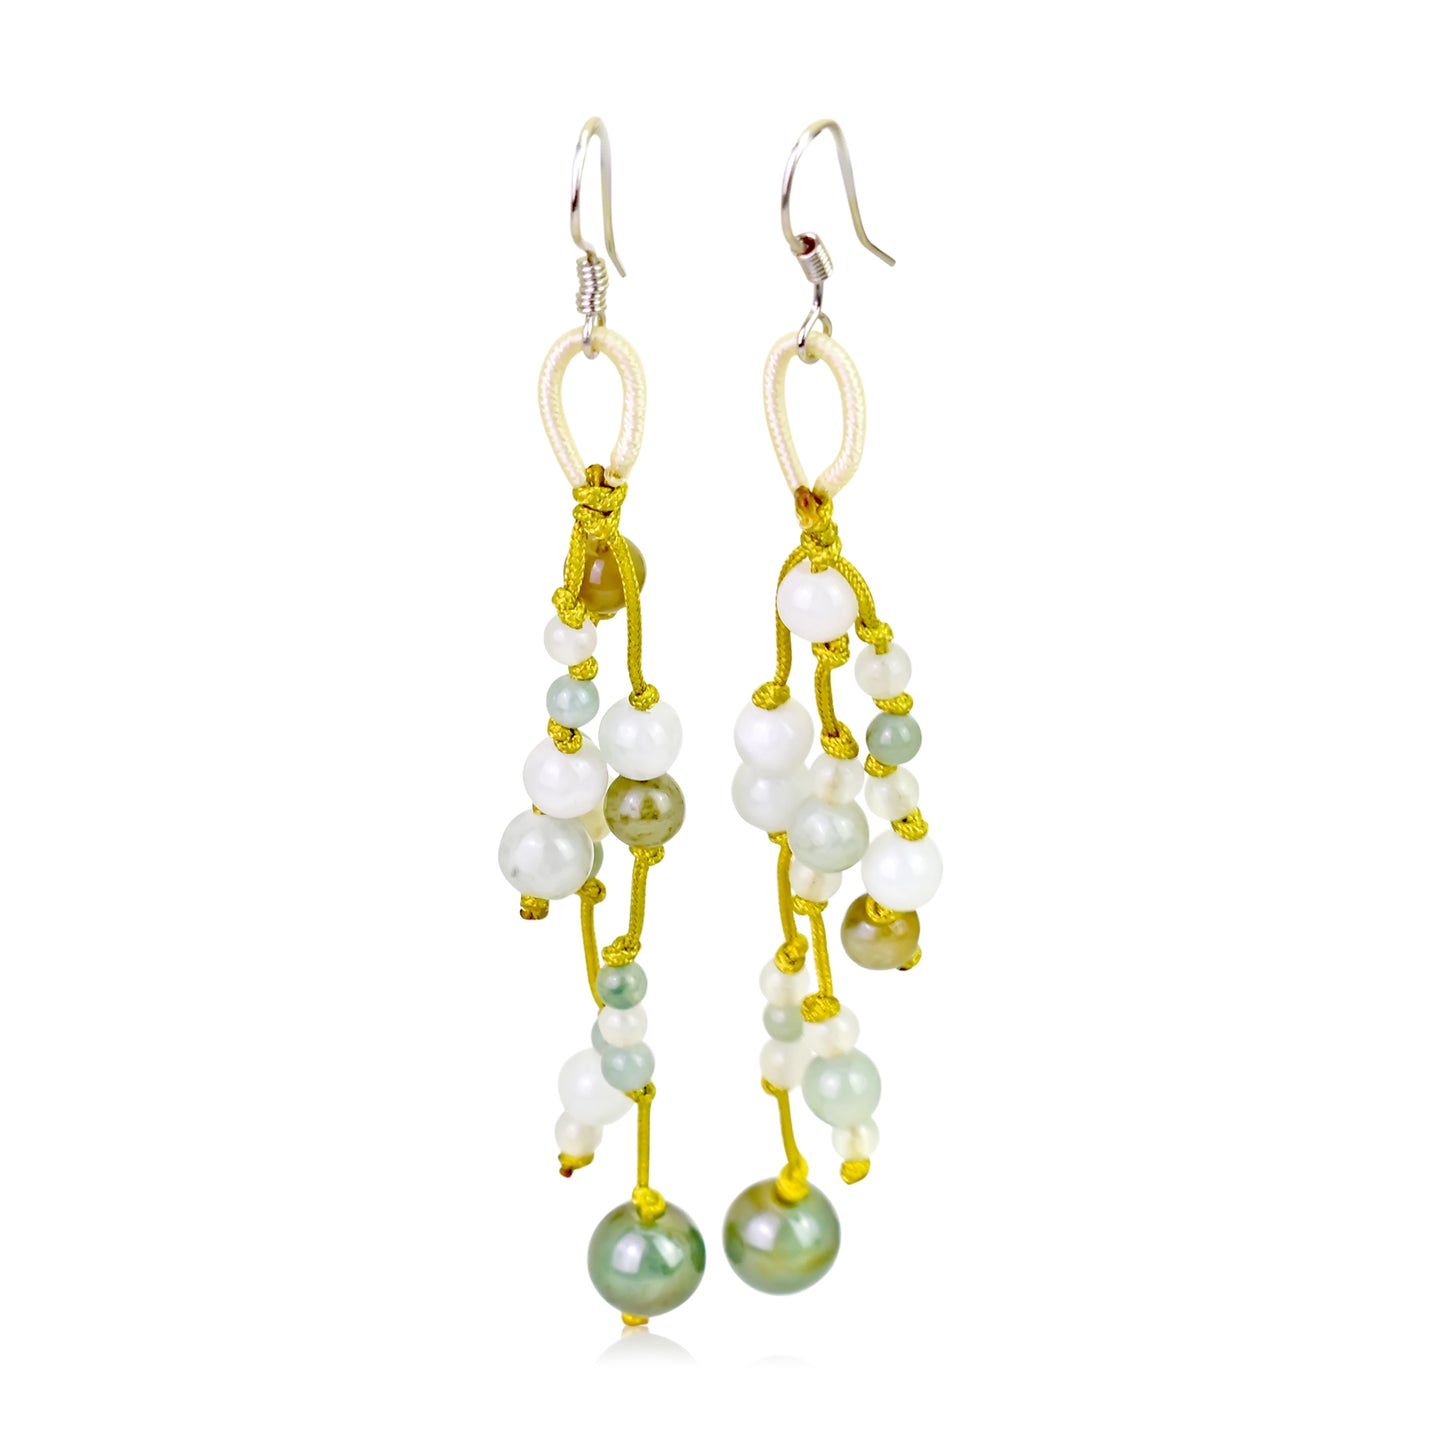 Add Some Colors and Dangle with this Breathtaking Jade Beads Earrings made with Yellow Cord